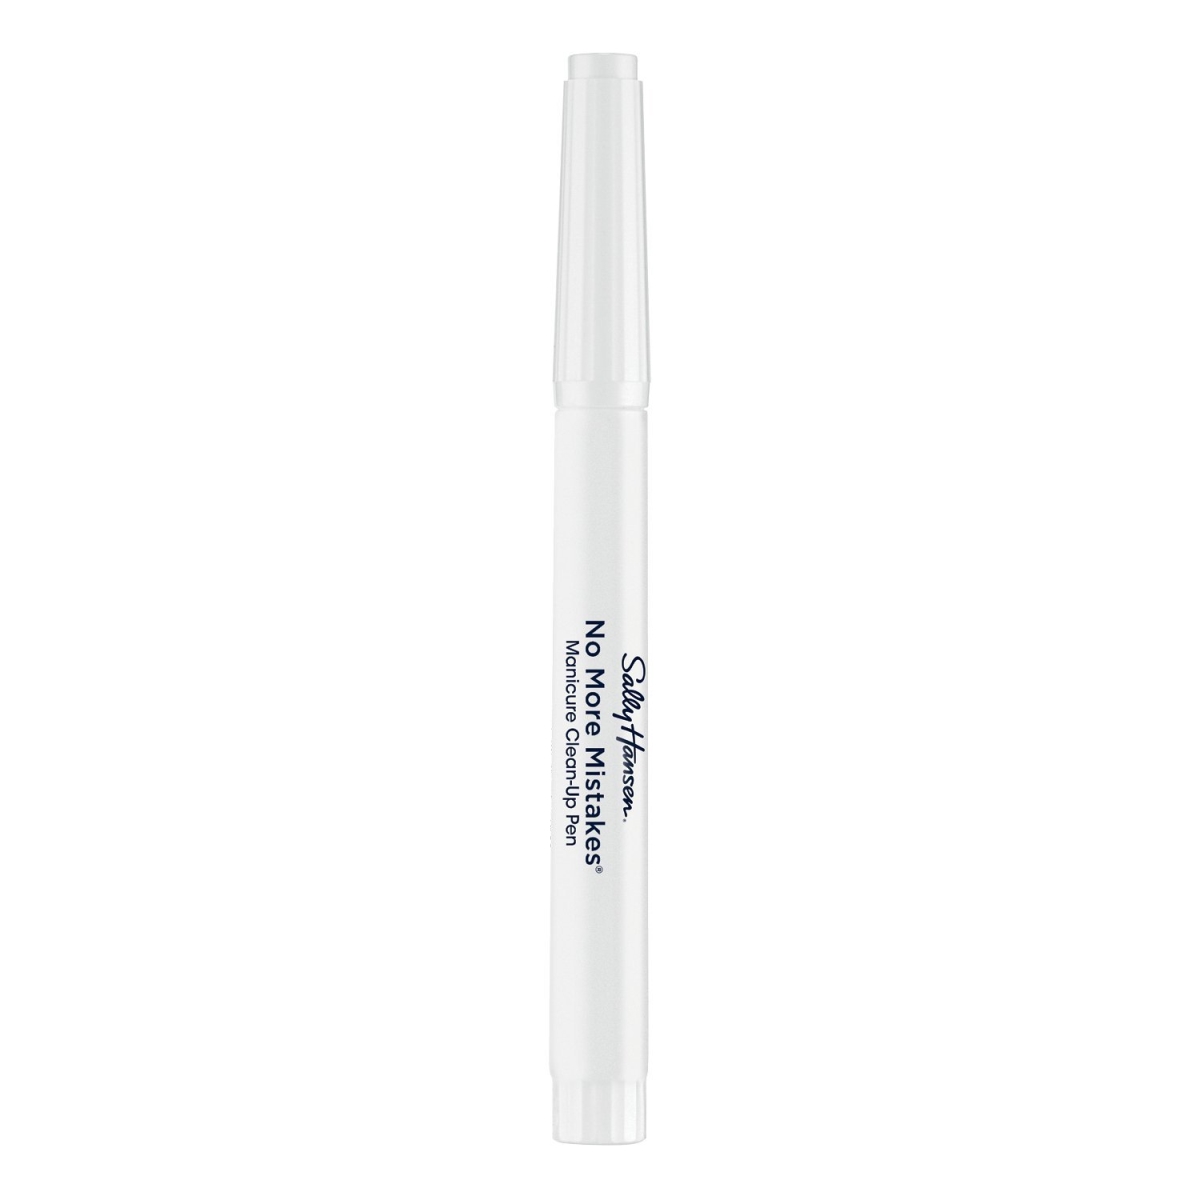 Coty Us 7424337 Sally Hansen No More Mistakes Manicure Clean-up Pen, Clear 3096 - Pack Of 2